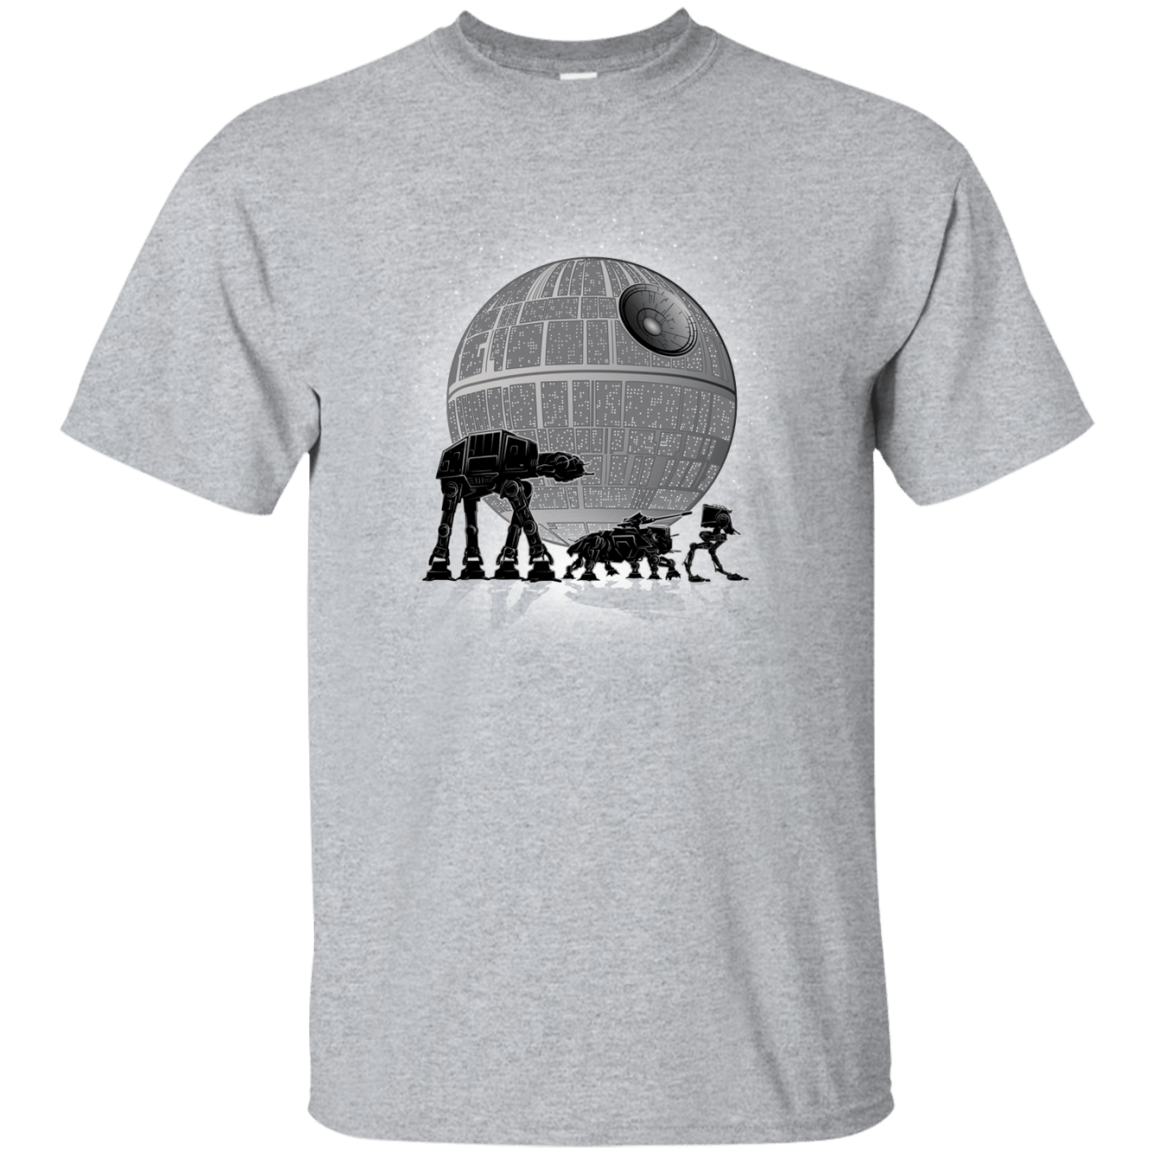 T-Shirts Sport Grey / Small Full Moon Over Empire T-Shirt